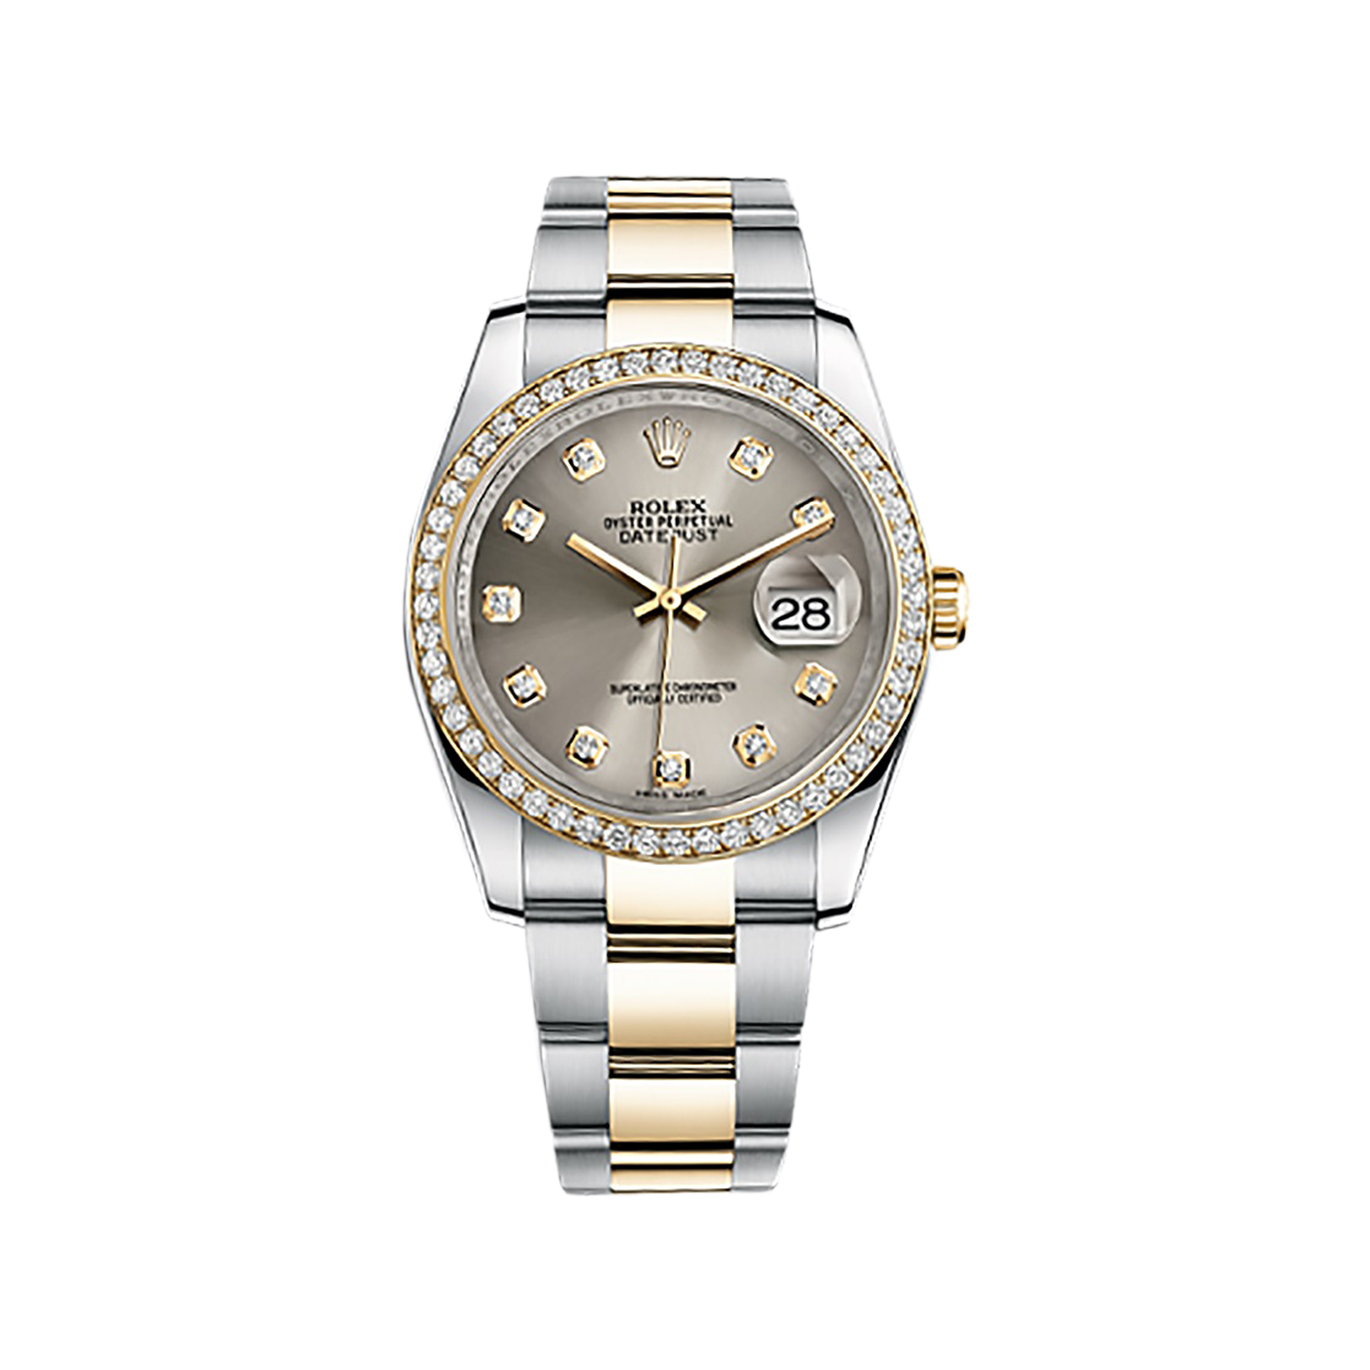 Datejust 36 116243 Gold & Stainless Steel Watch (Steel Set with Diamonds)